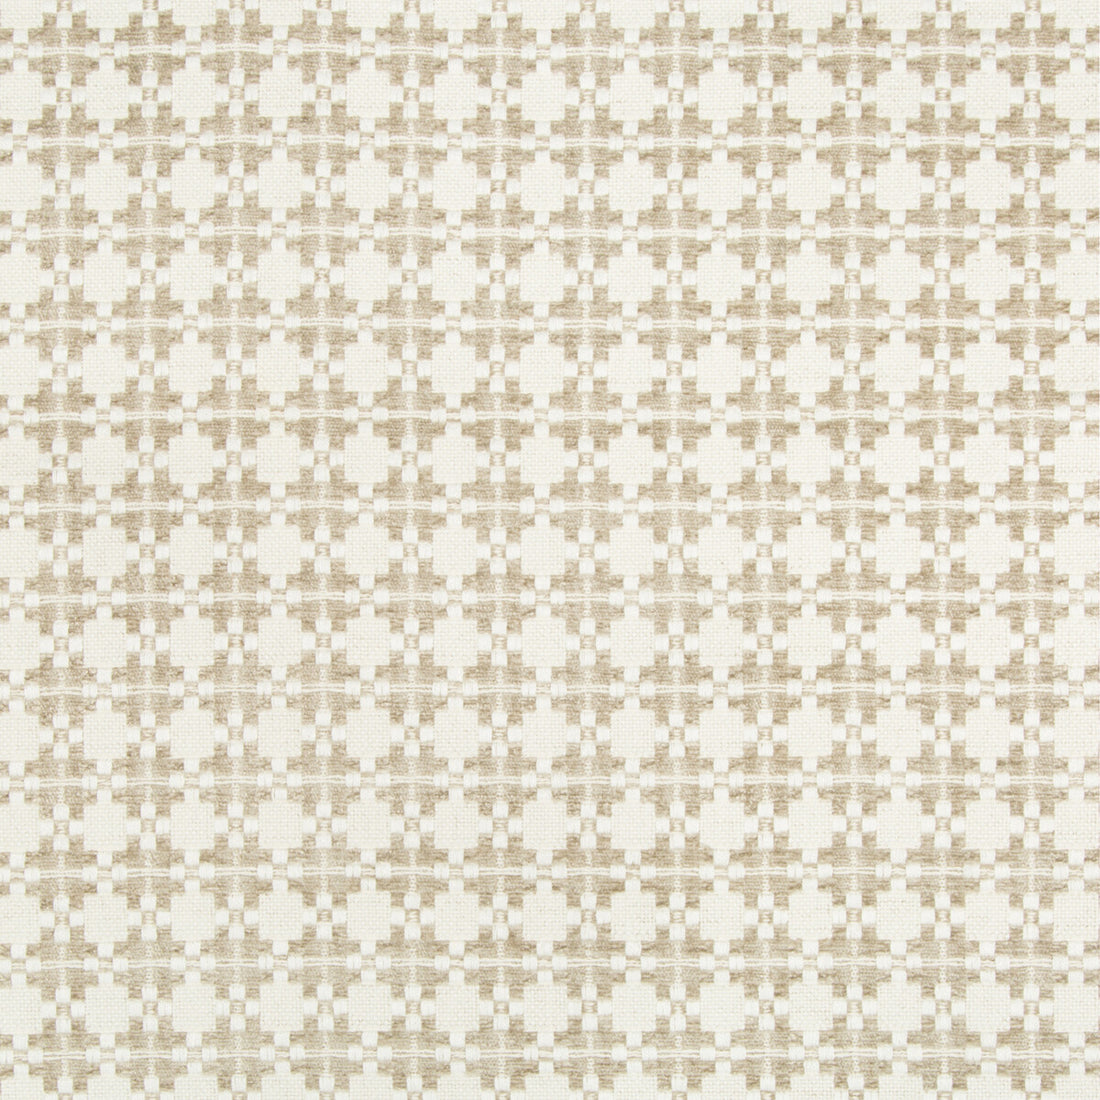 Back In Style fabric in taupe color - pattern 34962.16.0 - by Kravet Couture in the Modern Tailor collection